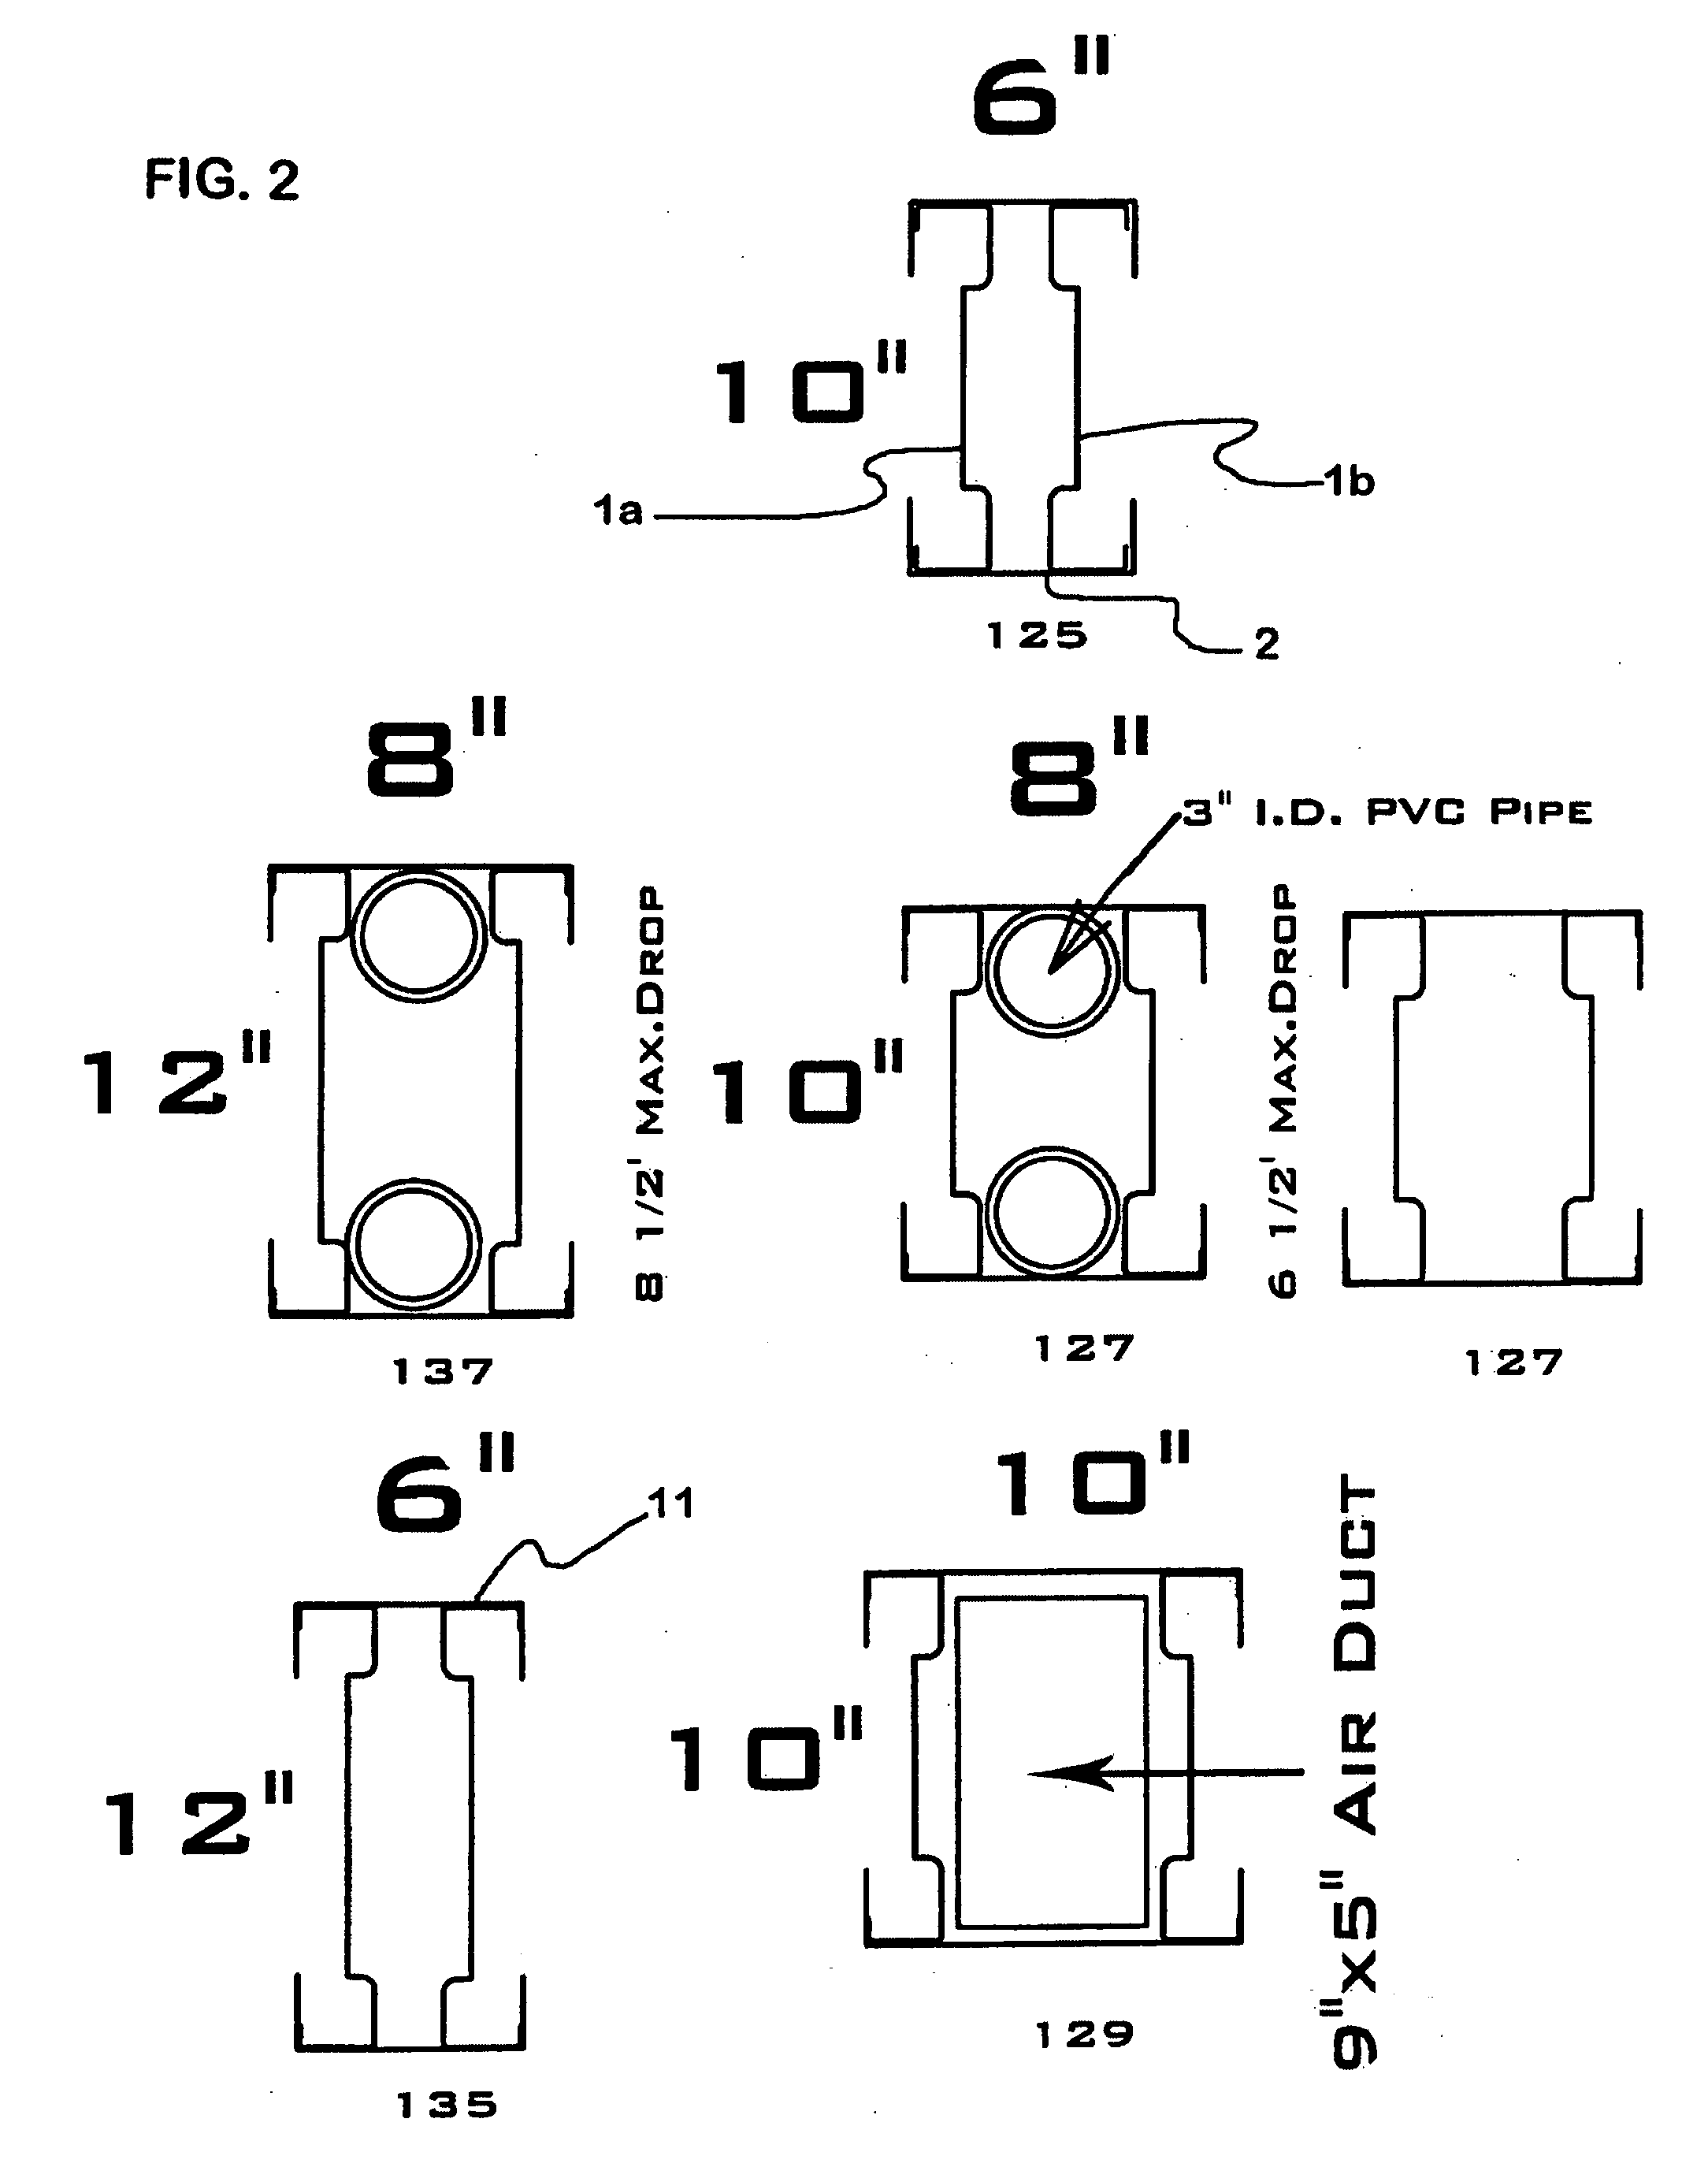 Joist and beam hanger for connecting transverse members to a U-shaped edge beam